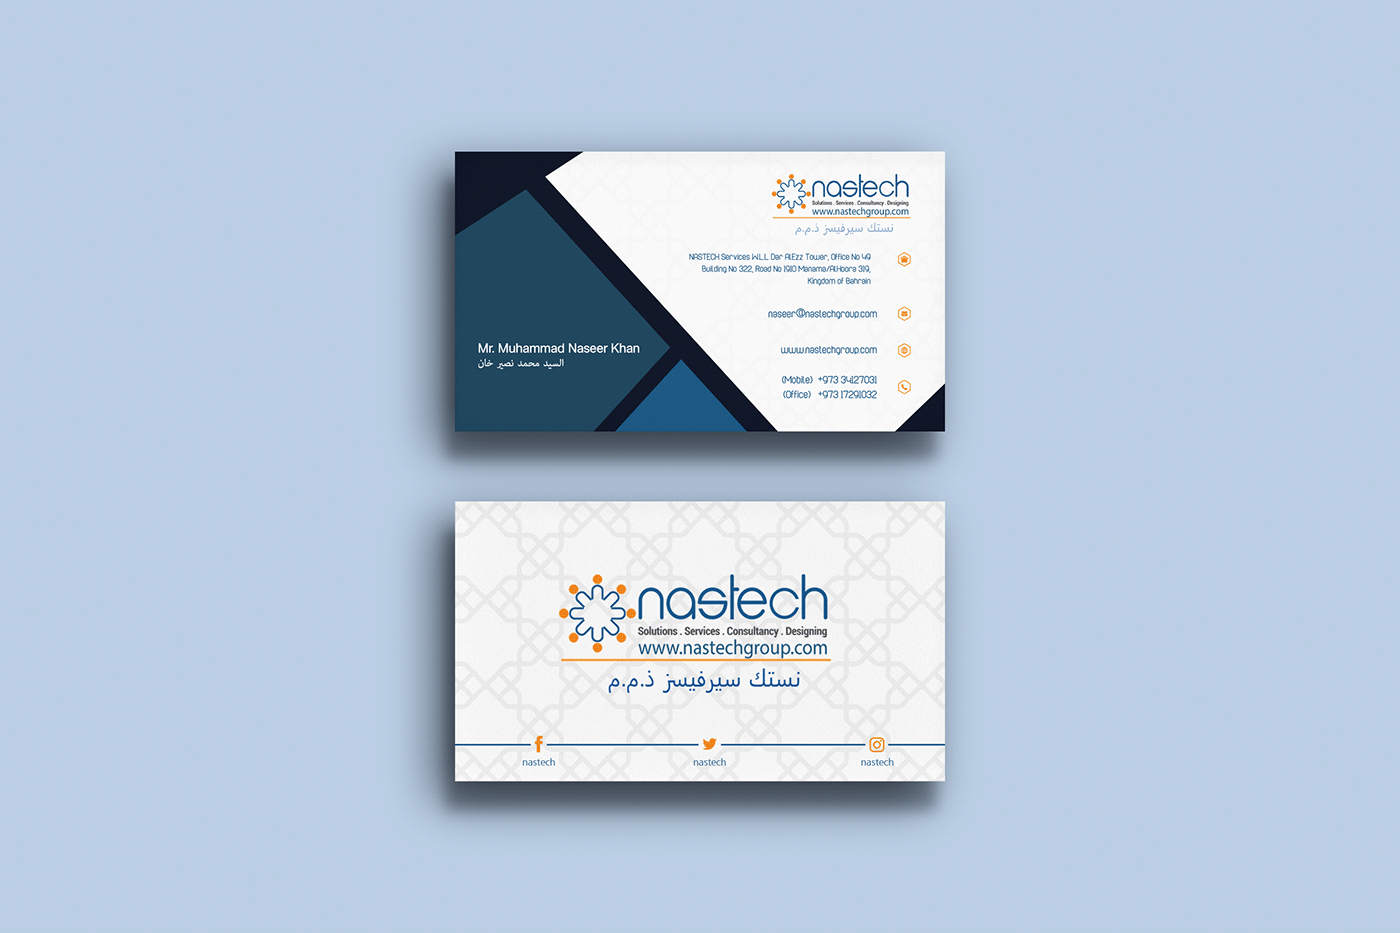 logo brand identity corporate branding IT Solutions tech networking cctv camera stationery design flyer Email Design